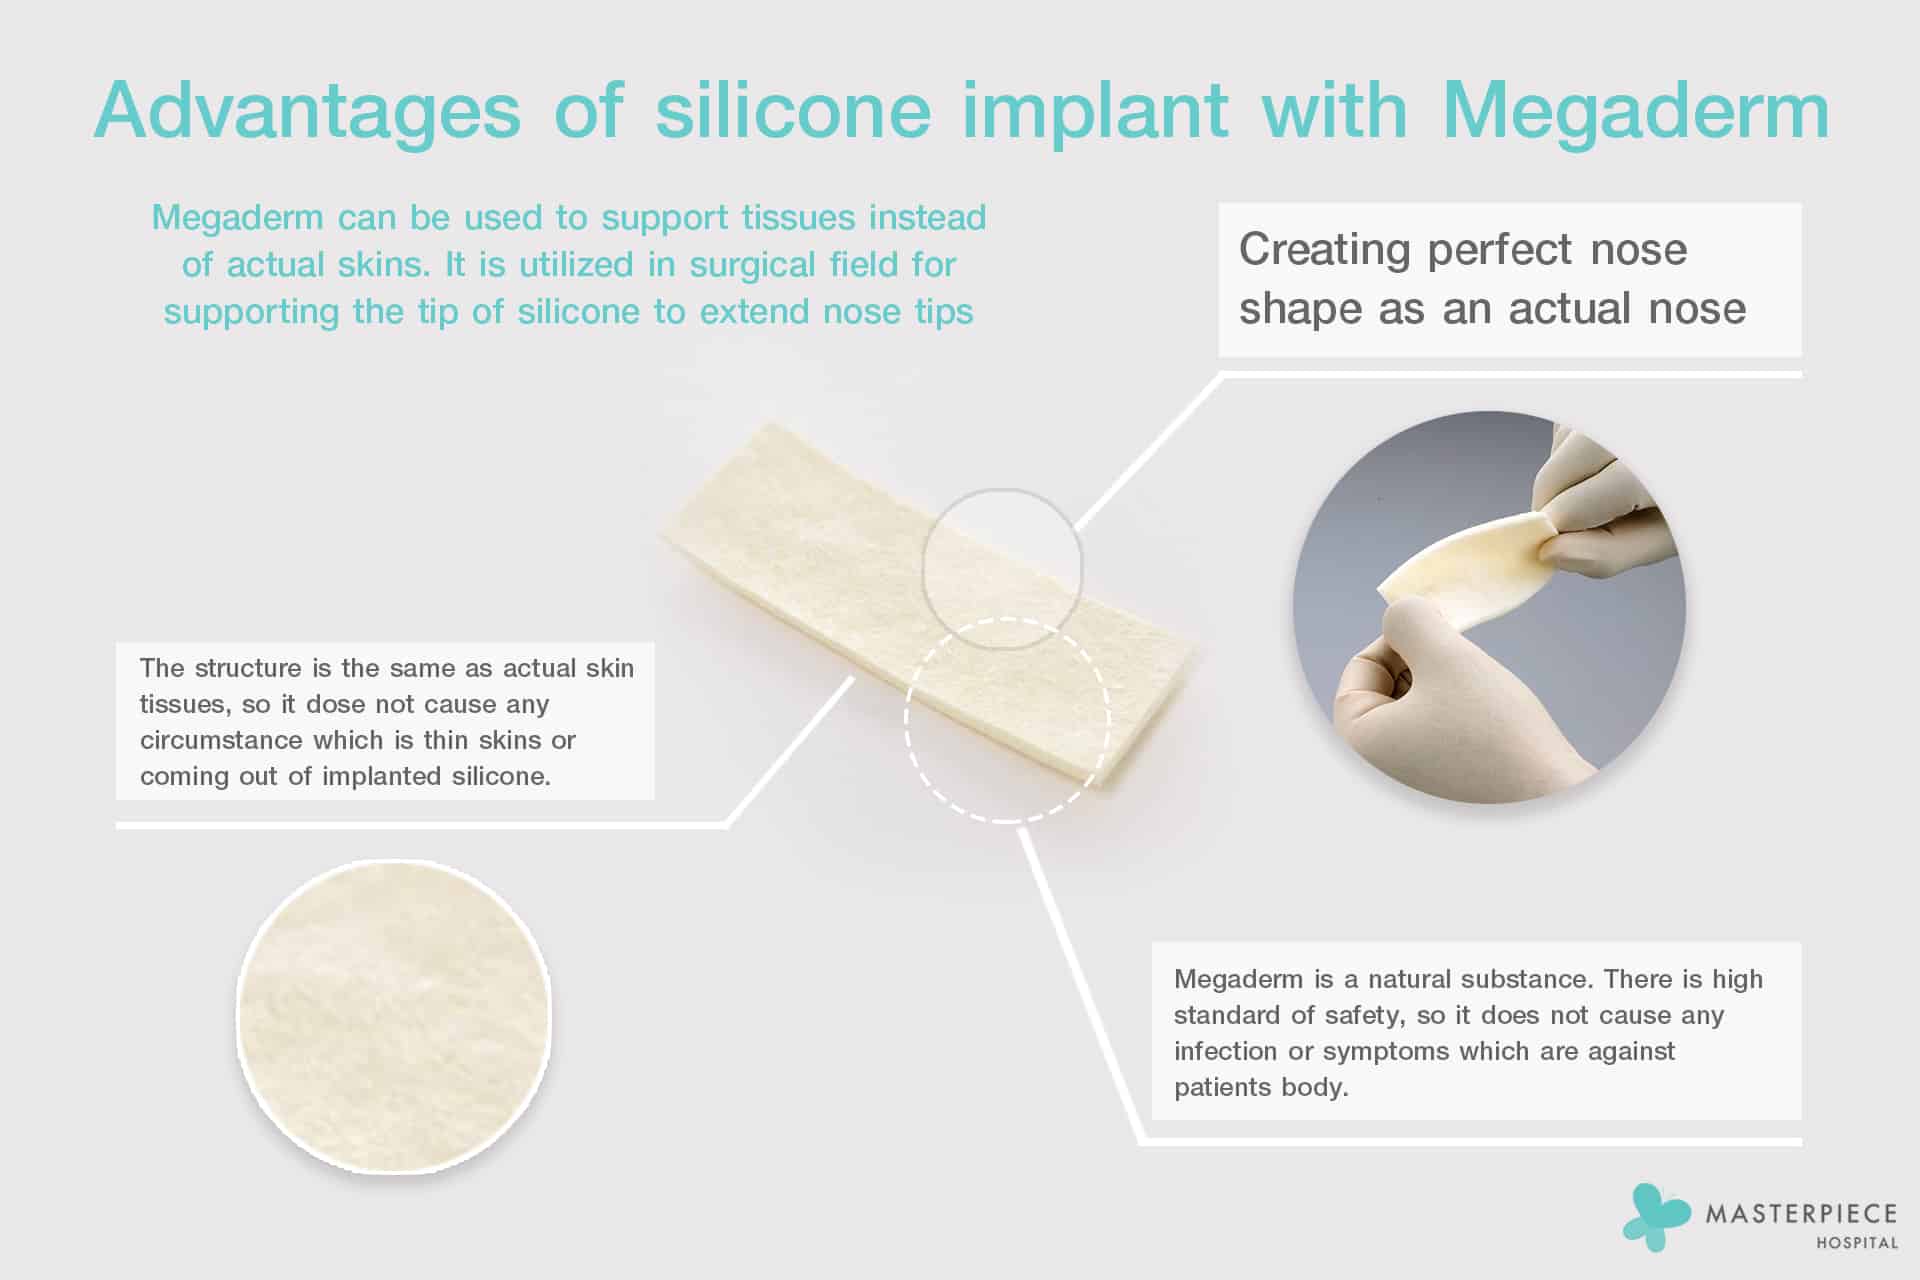 Advantages of silicone implant with Megaderm